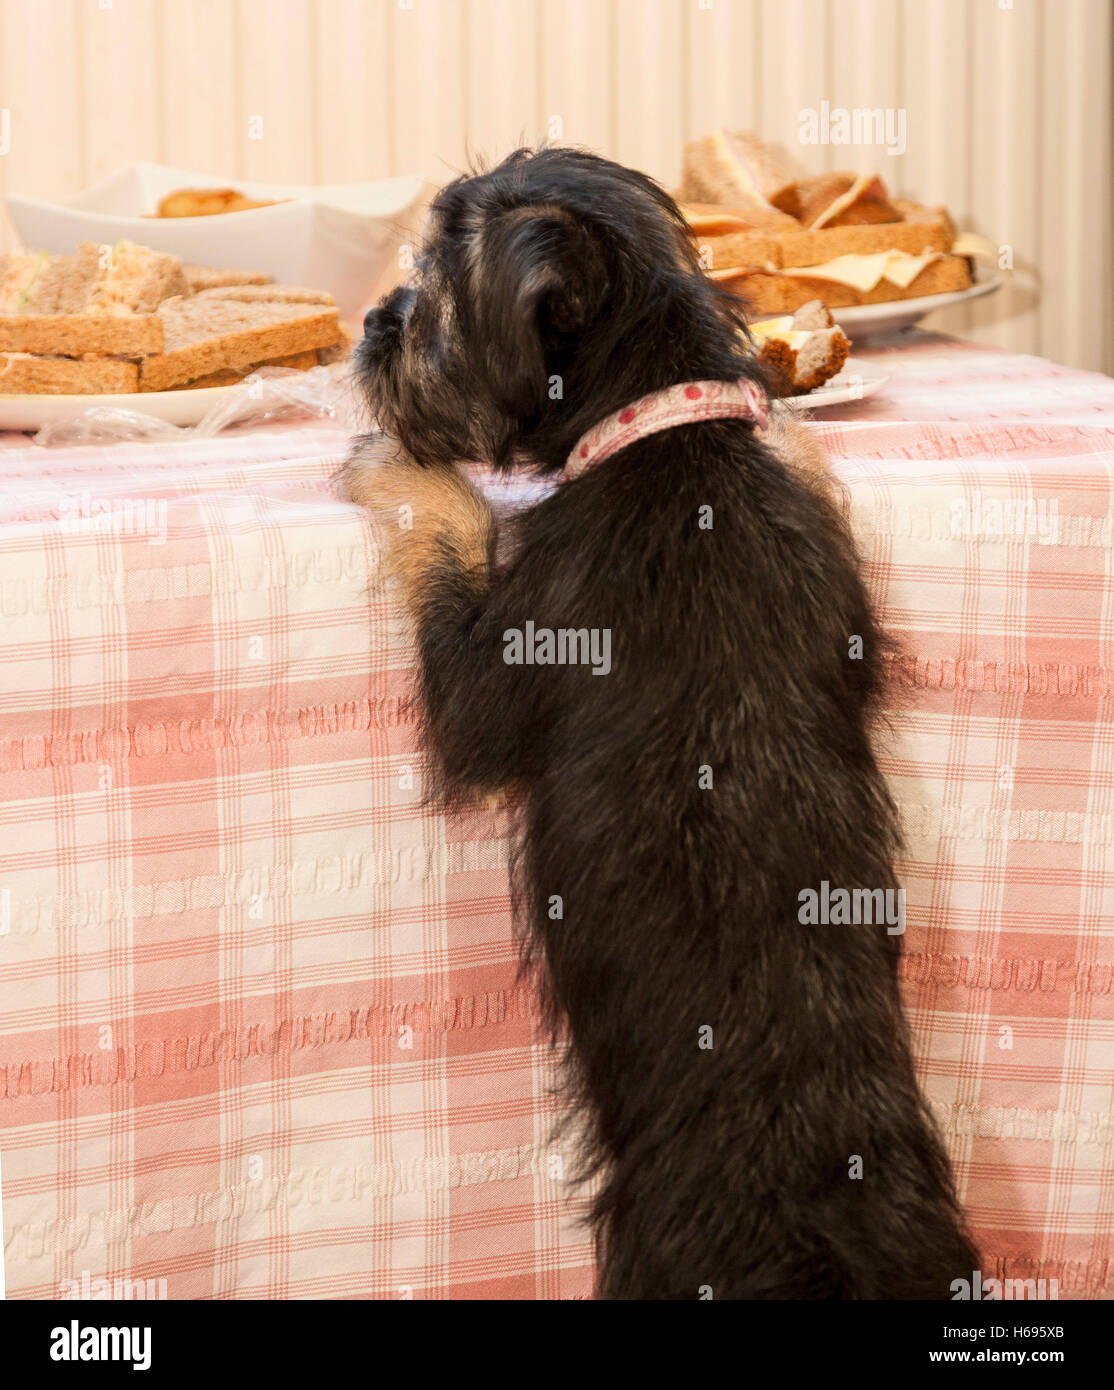 Cute puppy dog at dining table Stock Photo